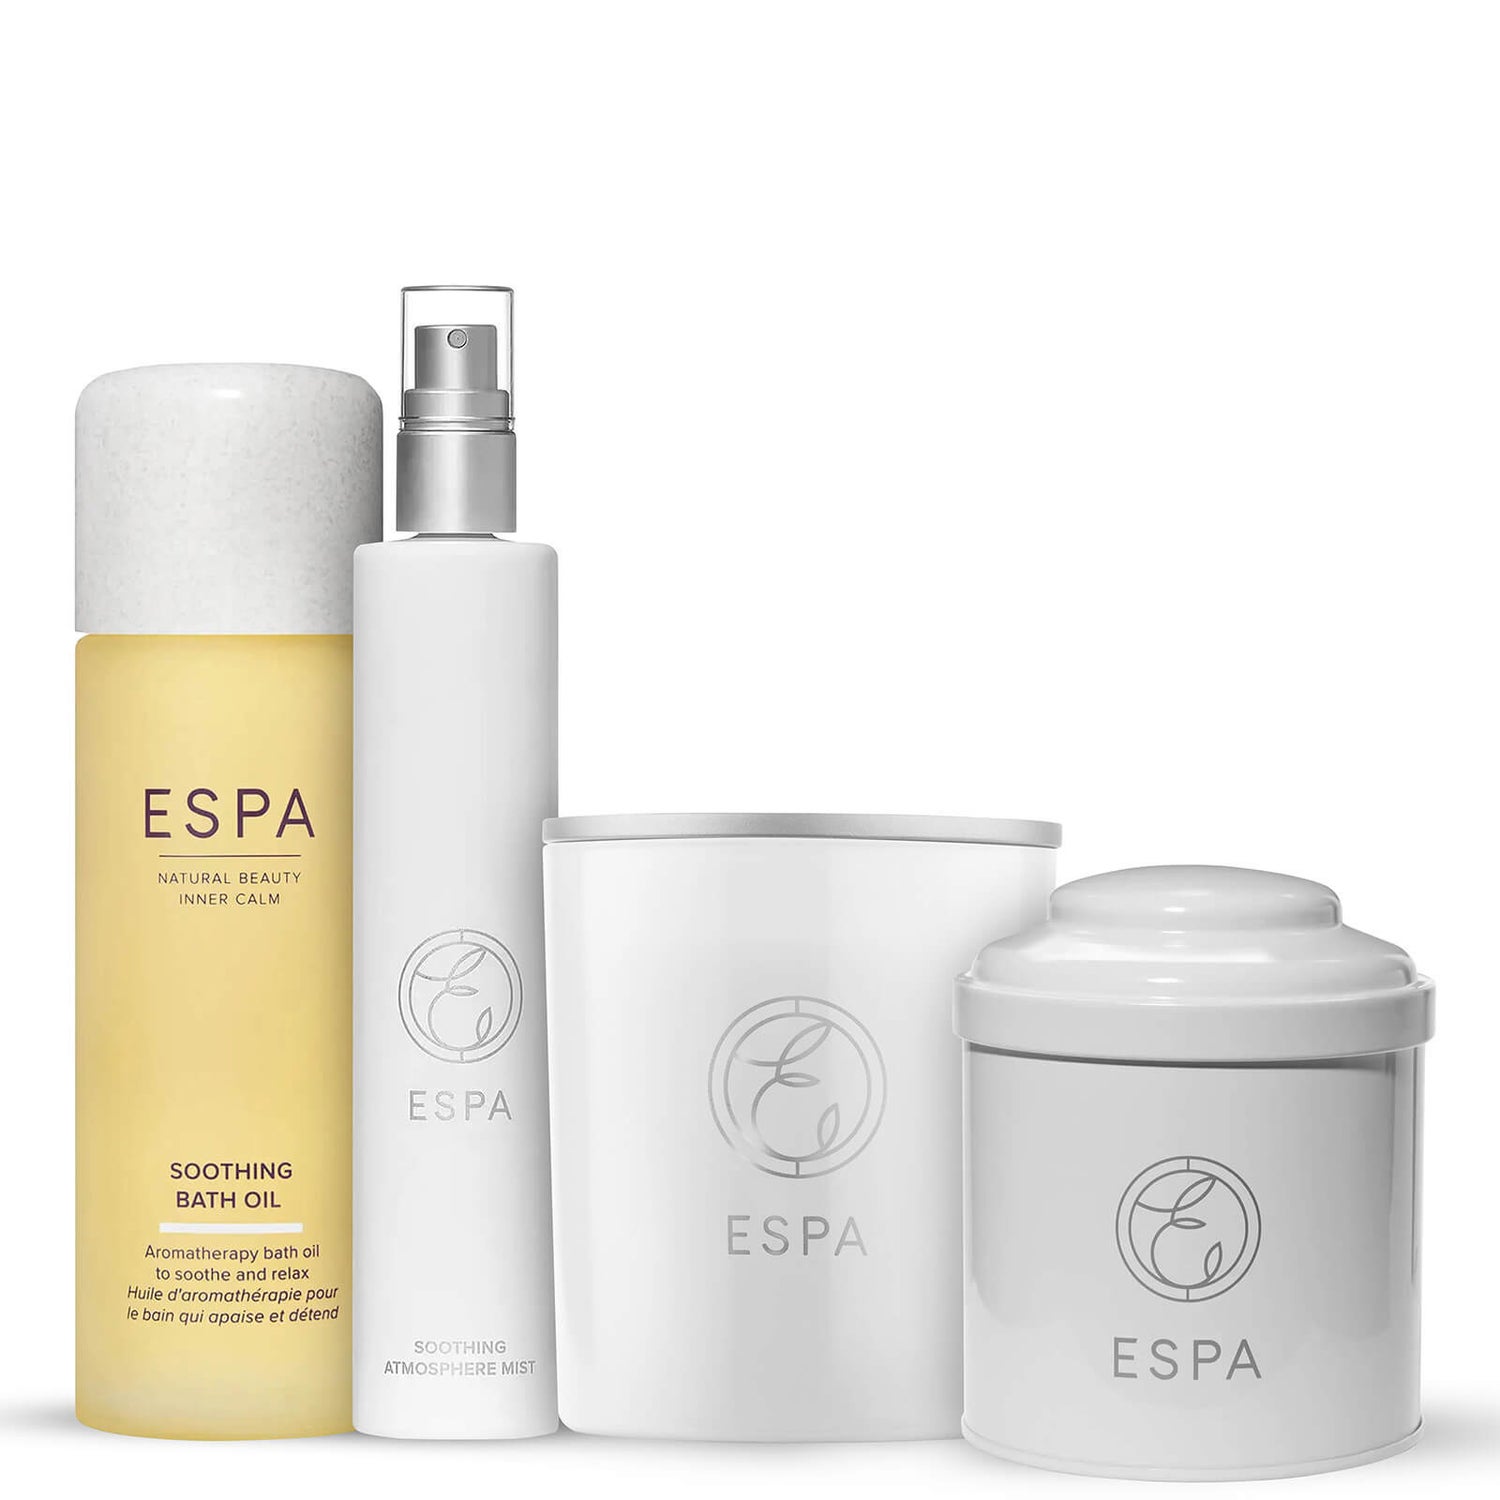 ESPA Soothing Collection (Worth £109.00)